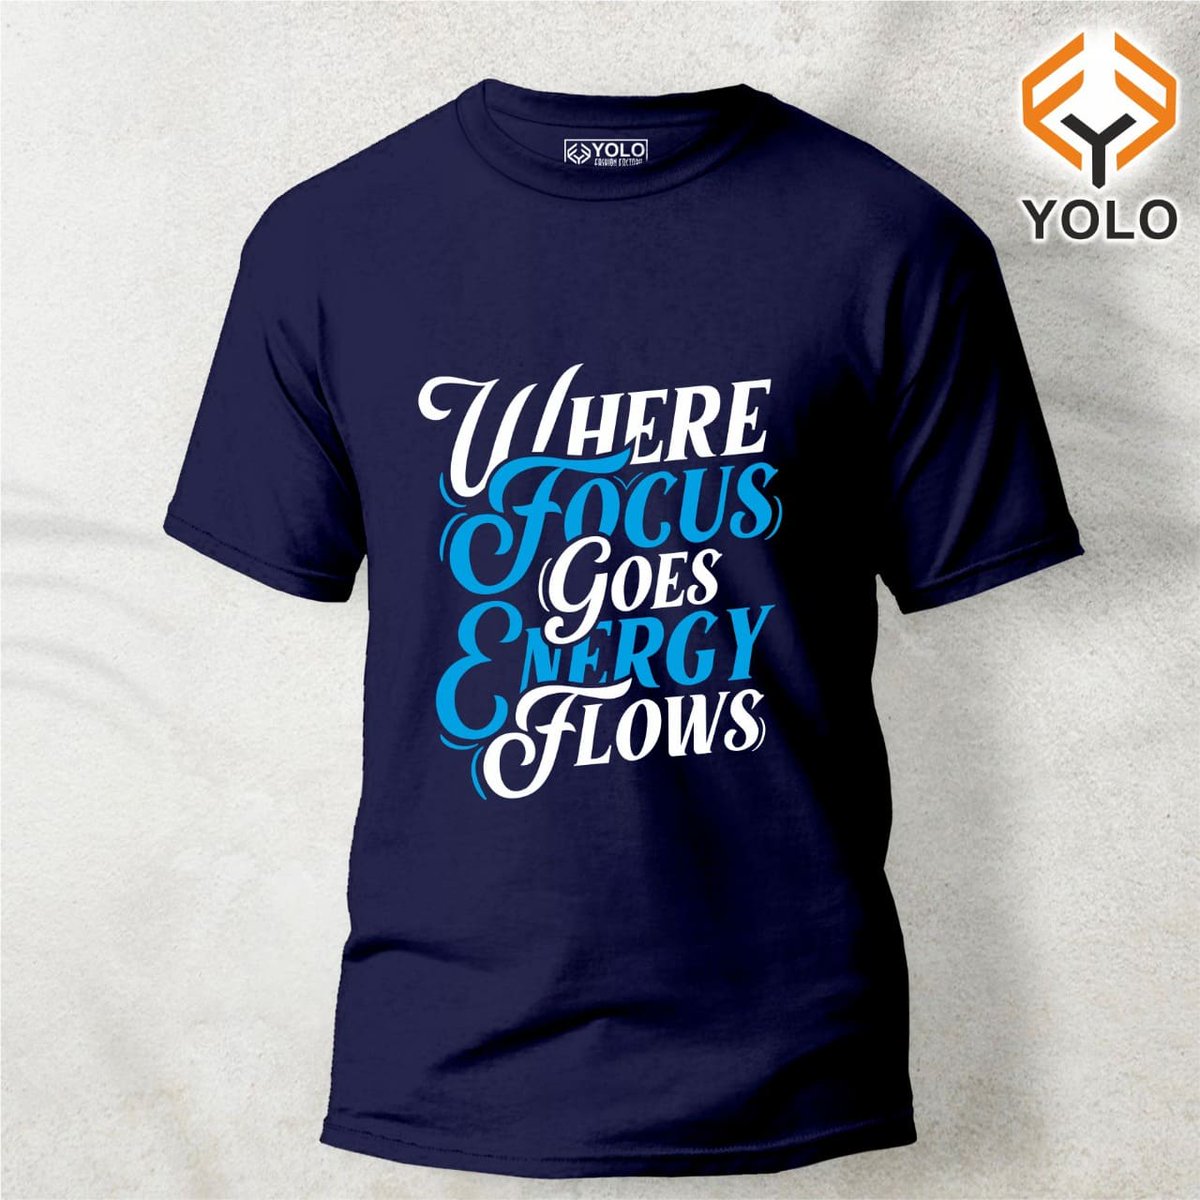 Positive quotes
Customized Tshirt collection

For details
9750597508

#wherefocusgoesenergyflows #wherefocus #energygoes #energyflows #postivequotes #positivewords #positivevibes #yolo✌️